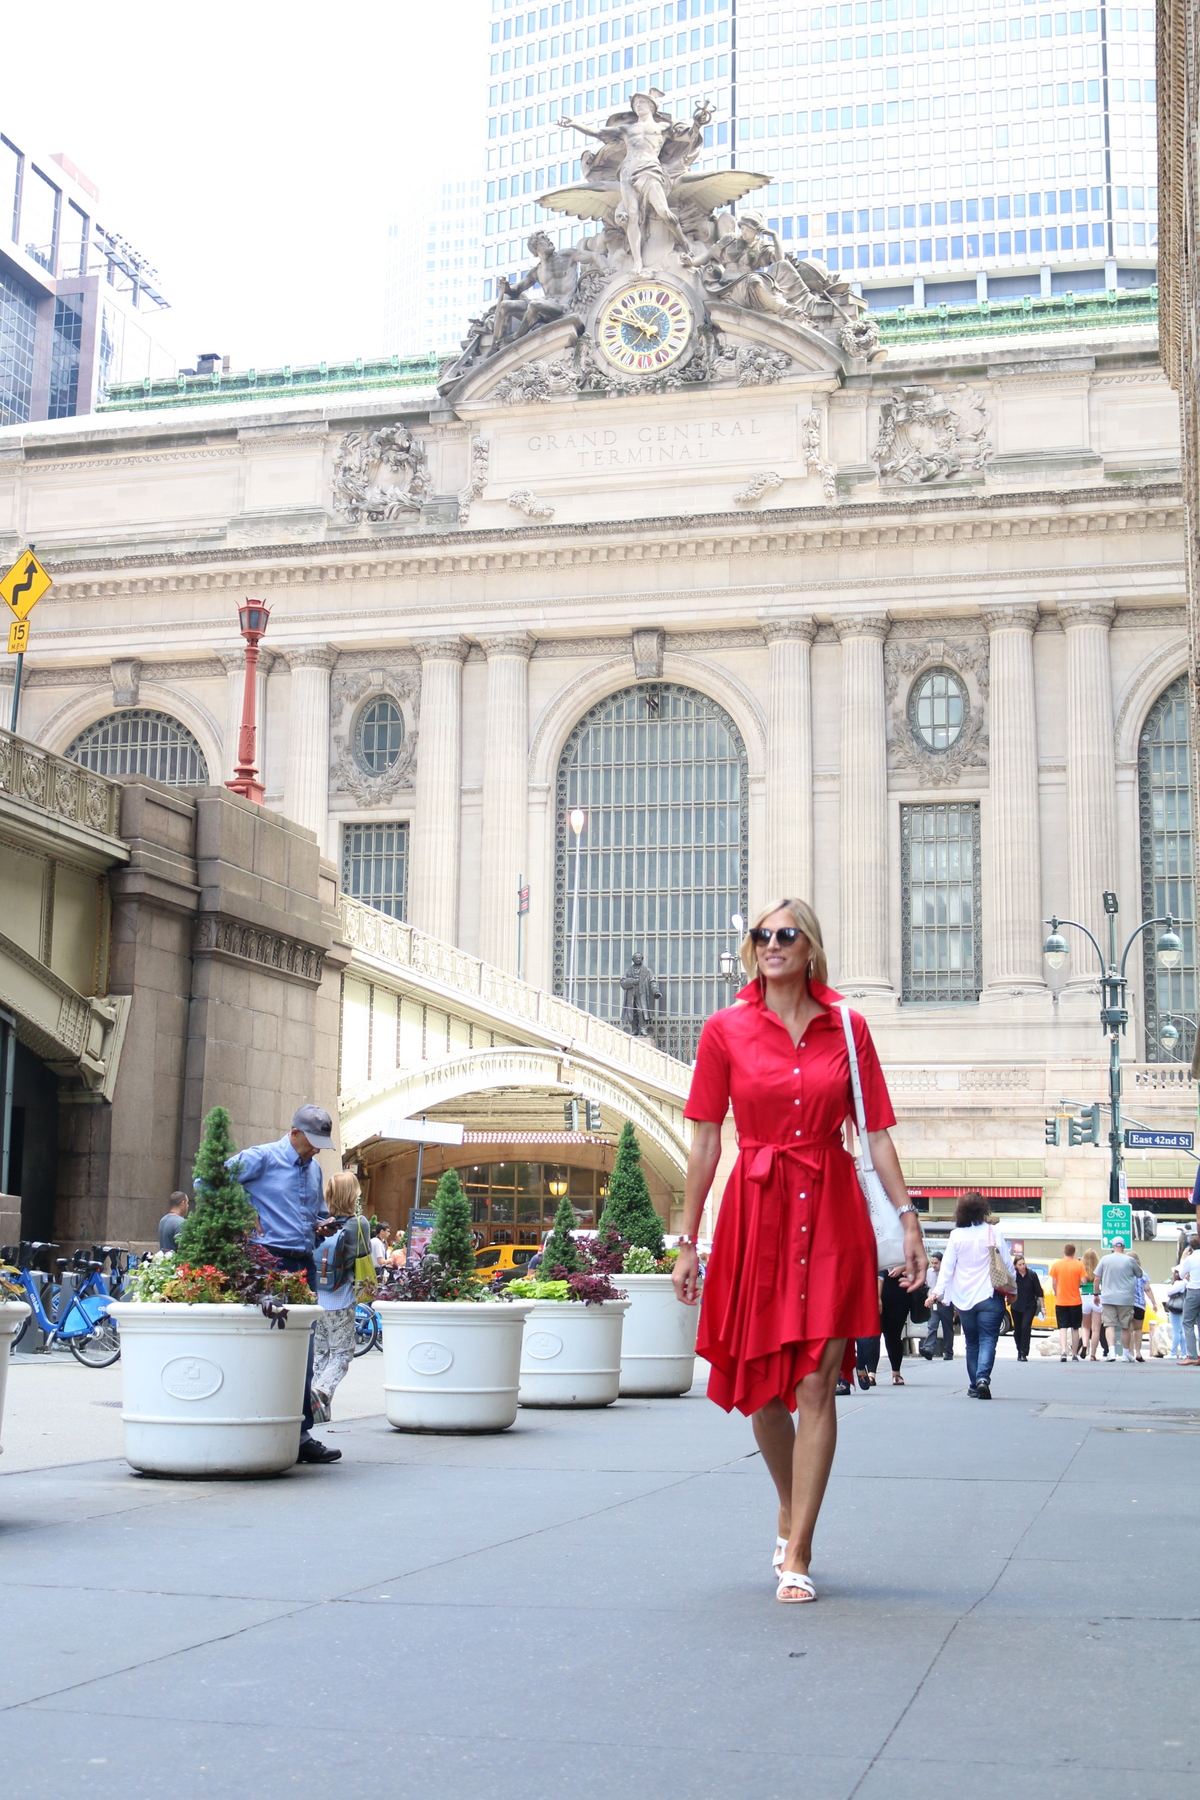 Kristen Taekman- The Best Day trips and Getaways from NYC